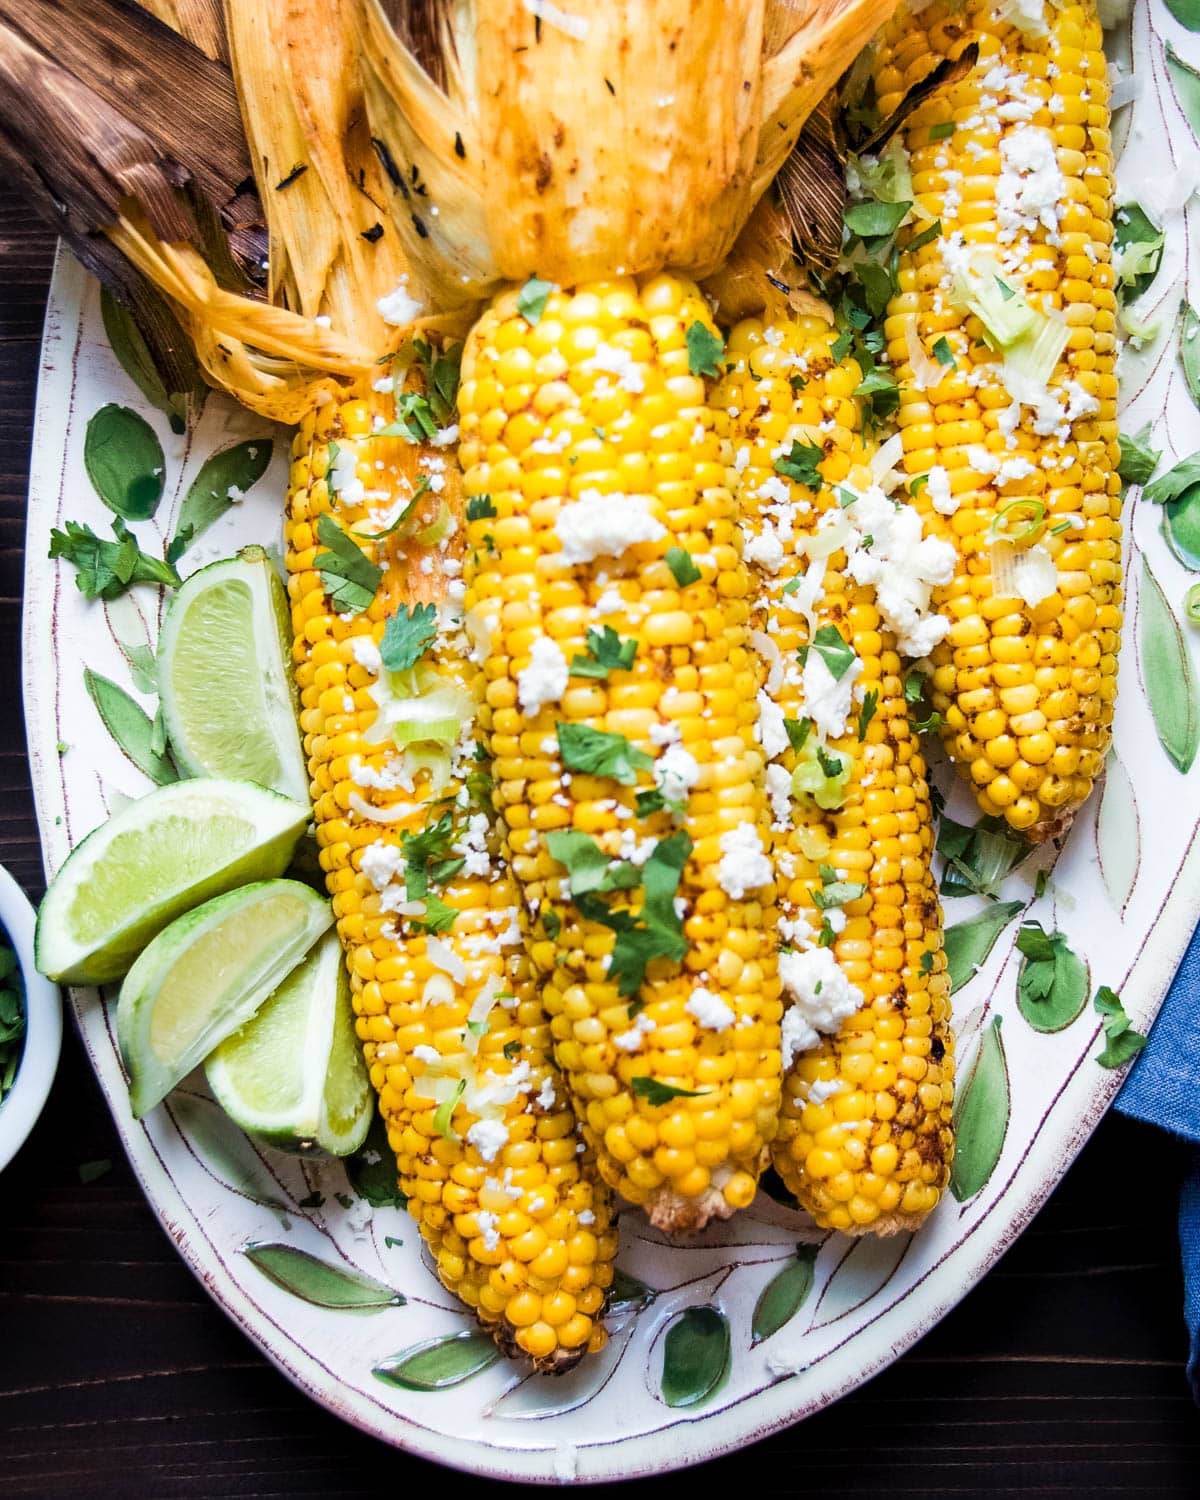 Peel back the husks and serve the chipotle corn on the cob with queso fresco, green onion and fresh cilantro.